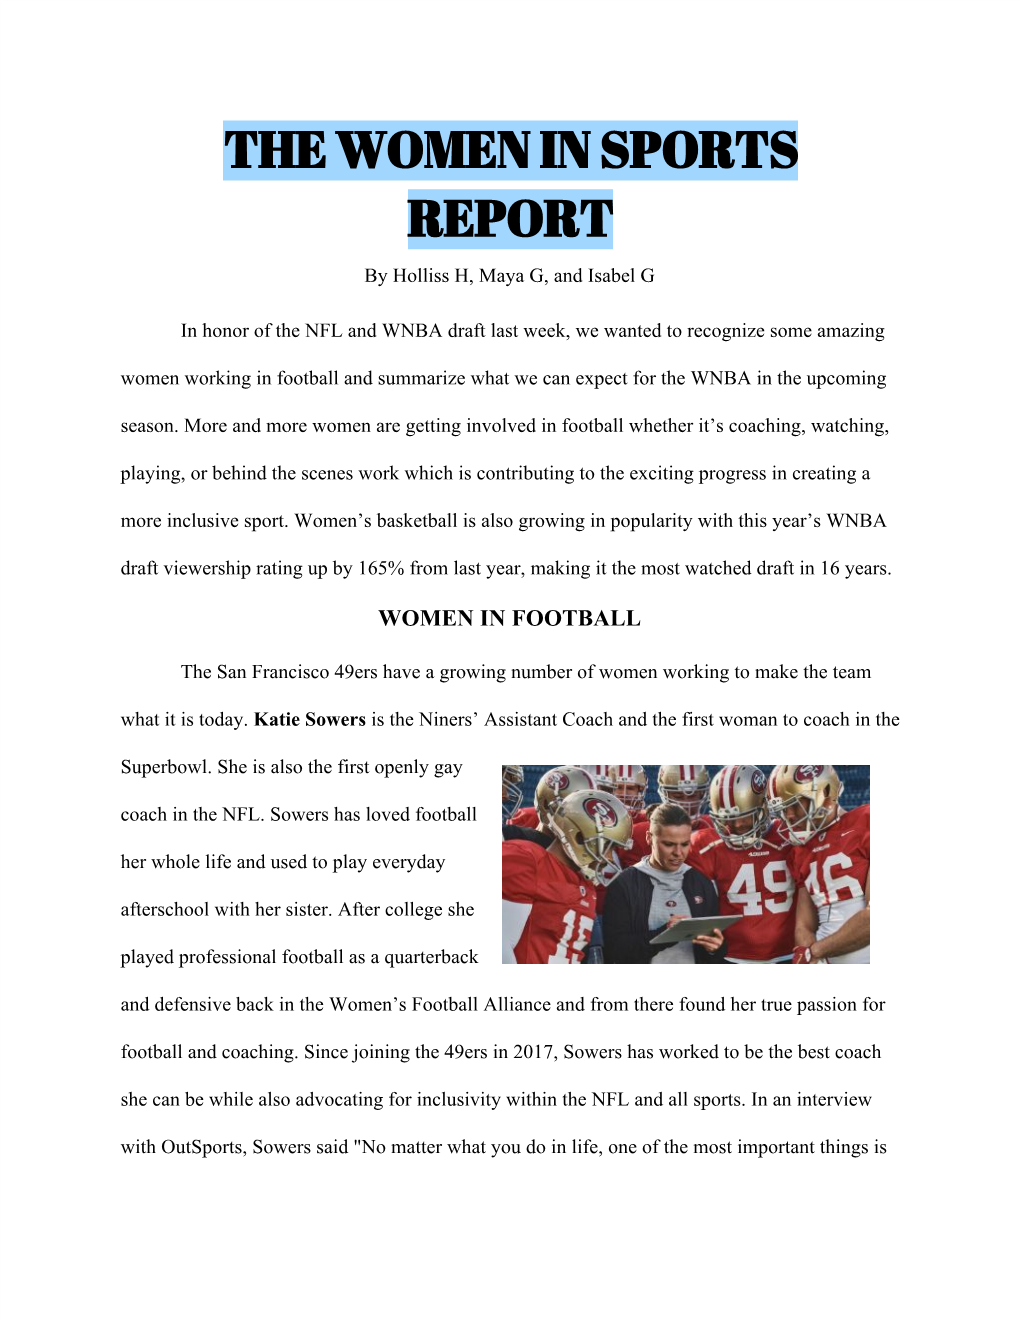 THE WOMEN in SPORTS REPORT by Holliss H, Maya G, and Isabel G